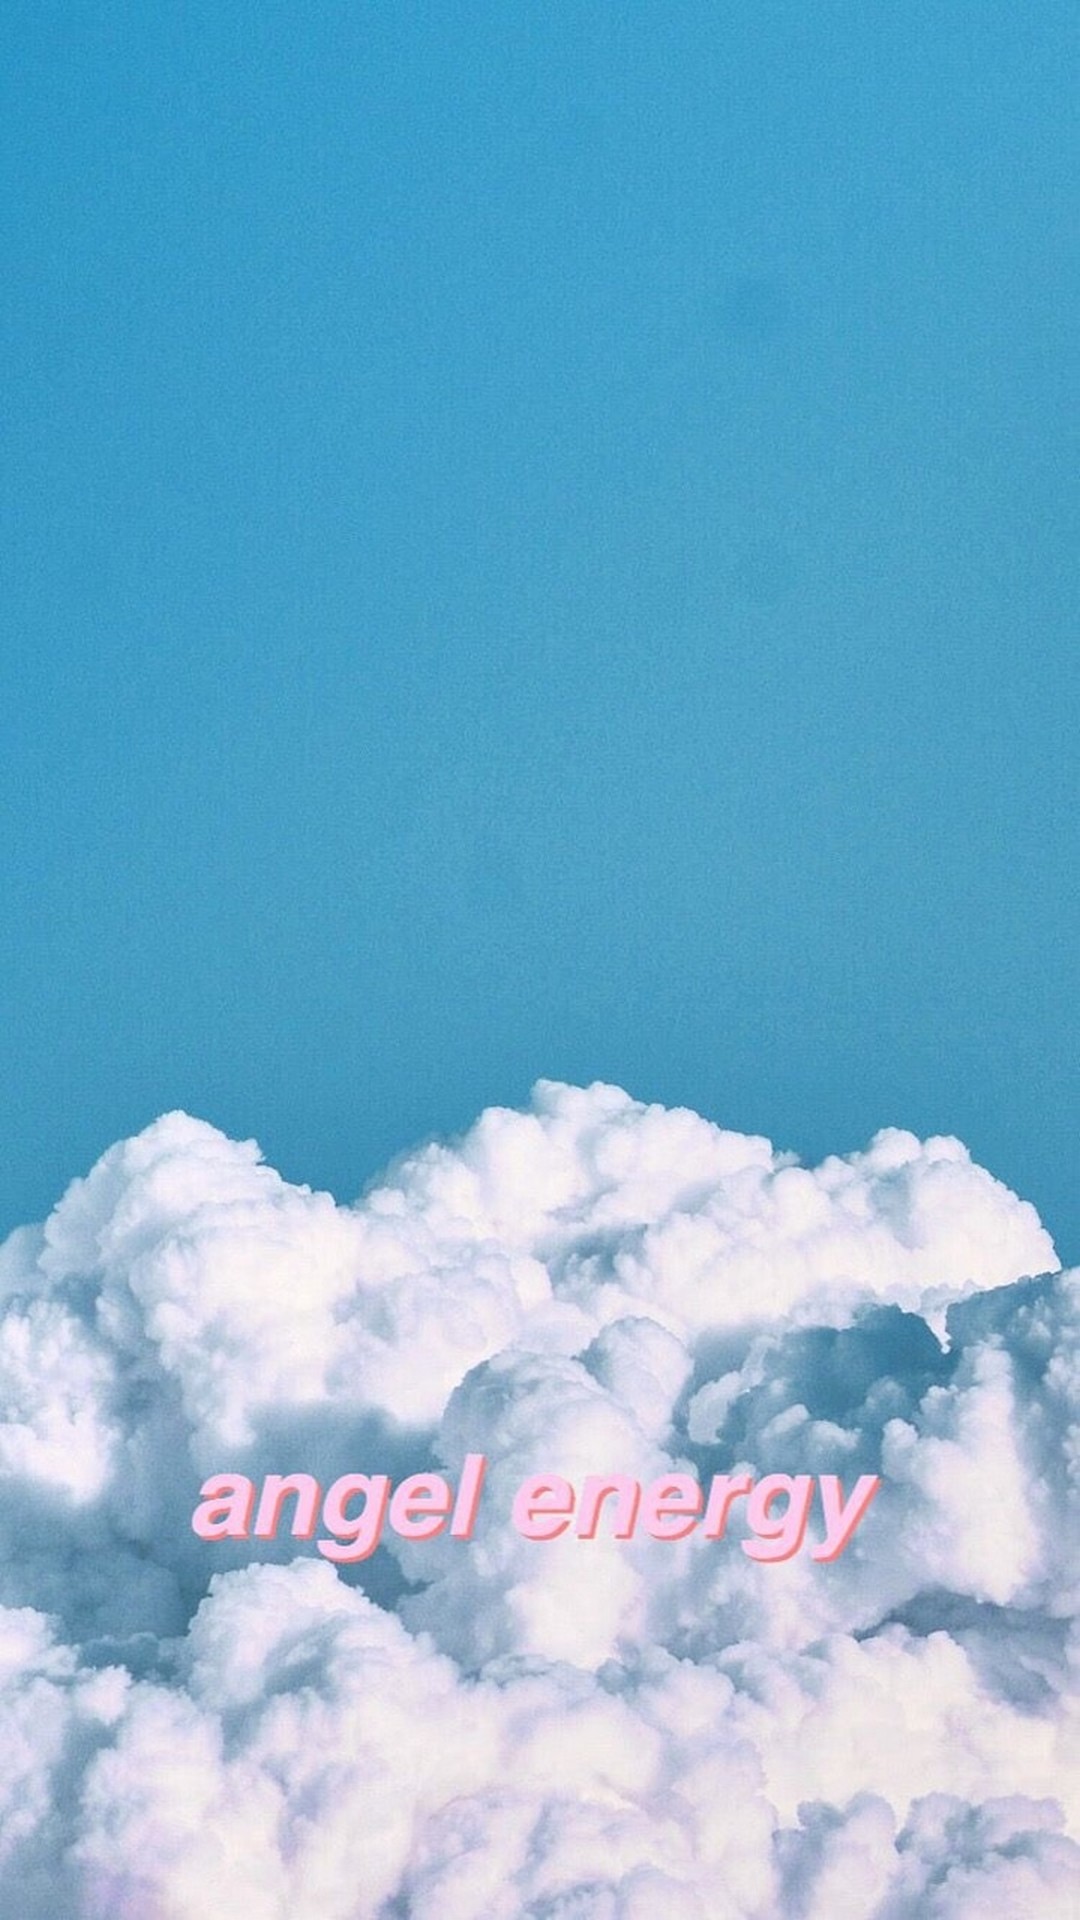 How To Make Aesthetic Wallpaper On iPhone